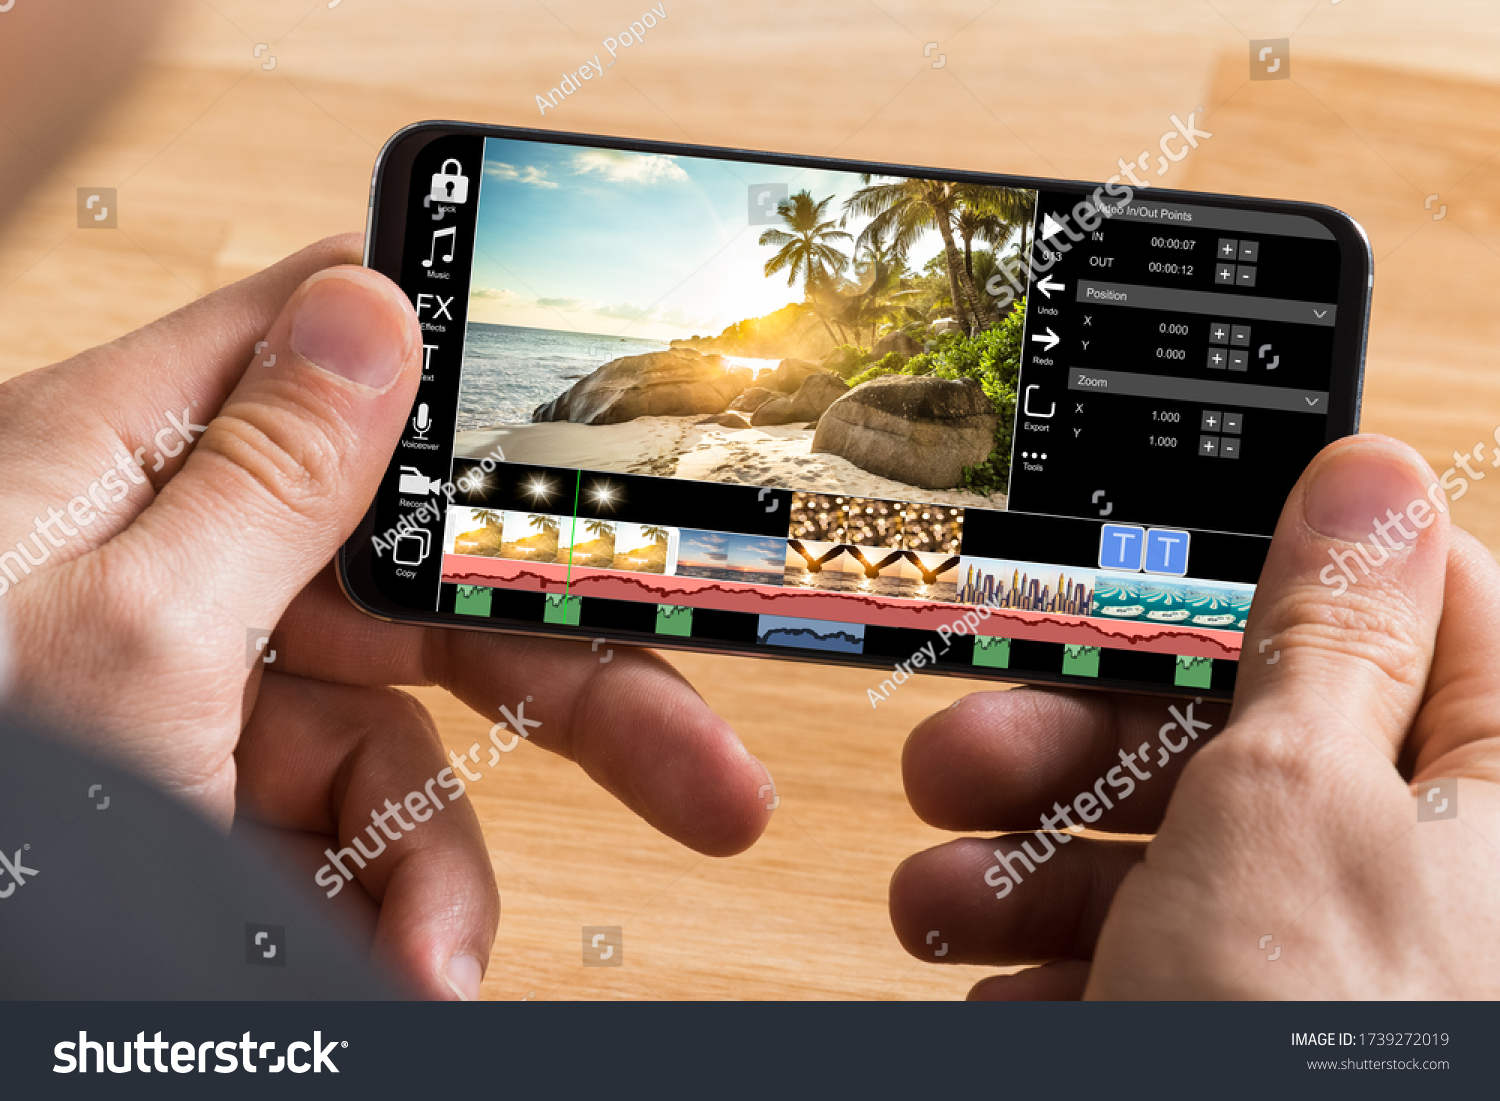 Editing Videos On Mobile Phone Using Video Editor App #1739272019